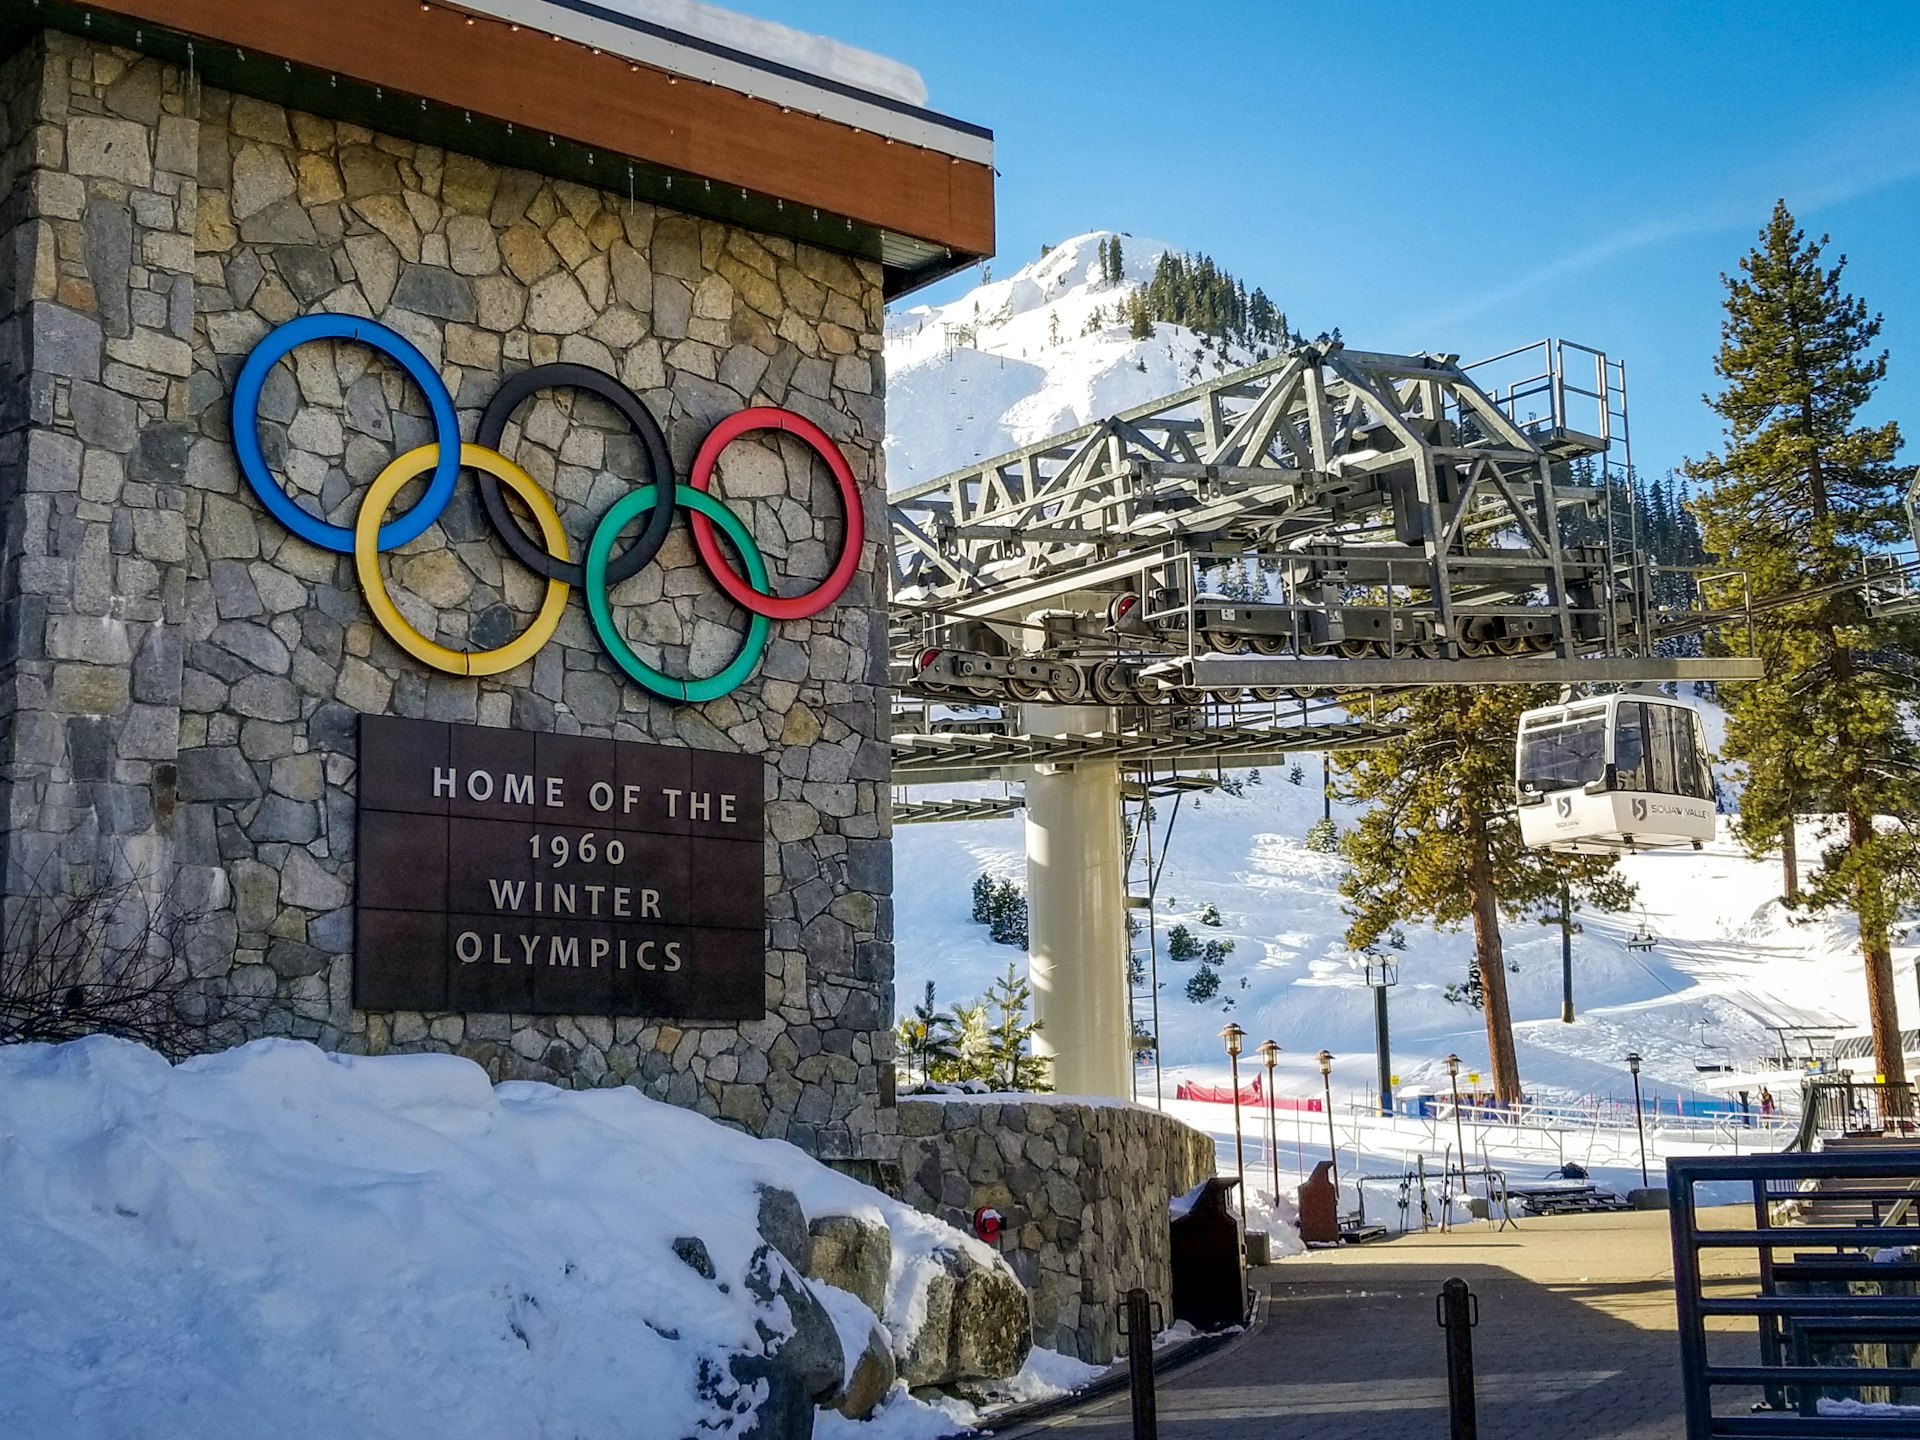 A photo of a resort sign with Olympic rings in the base area, and chairlift in the background